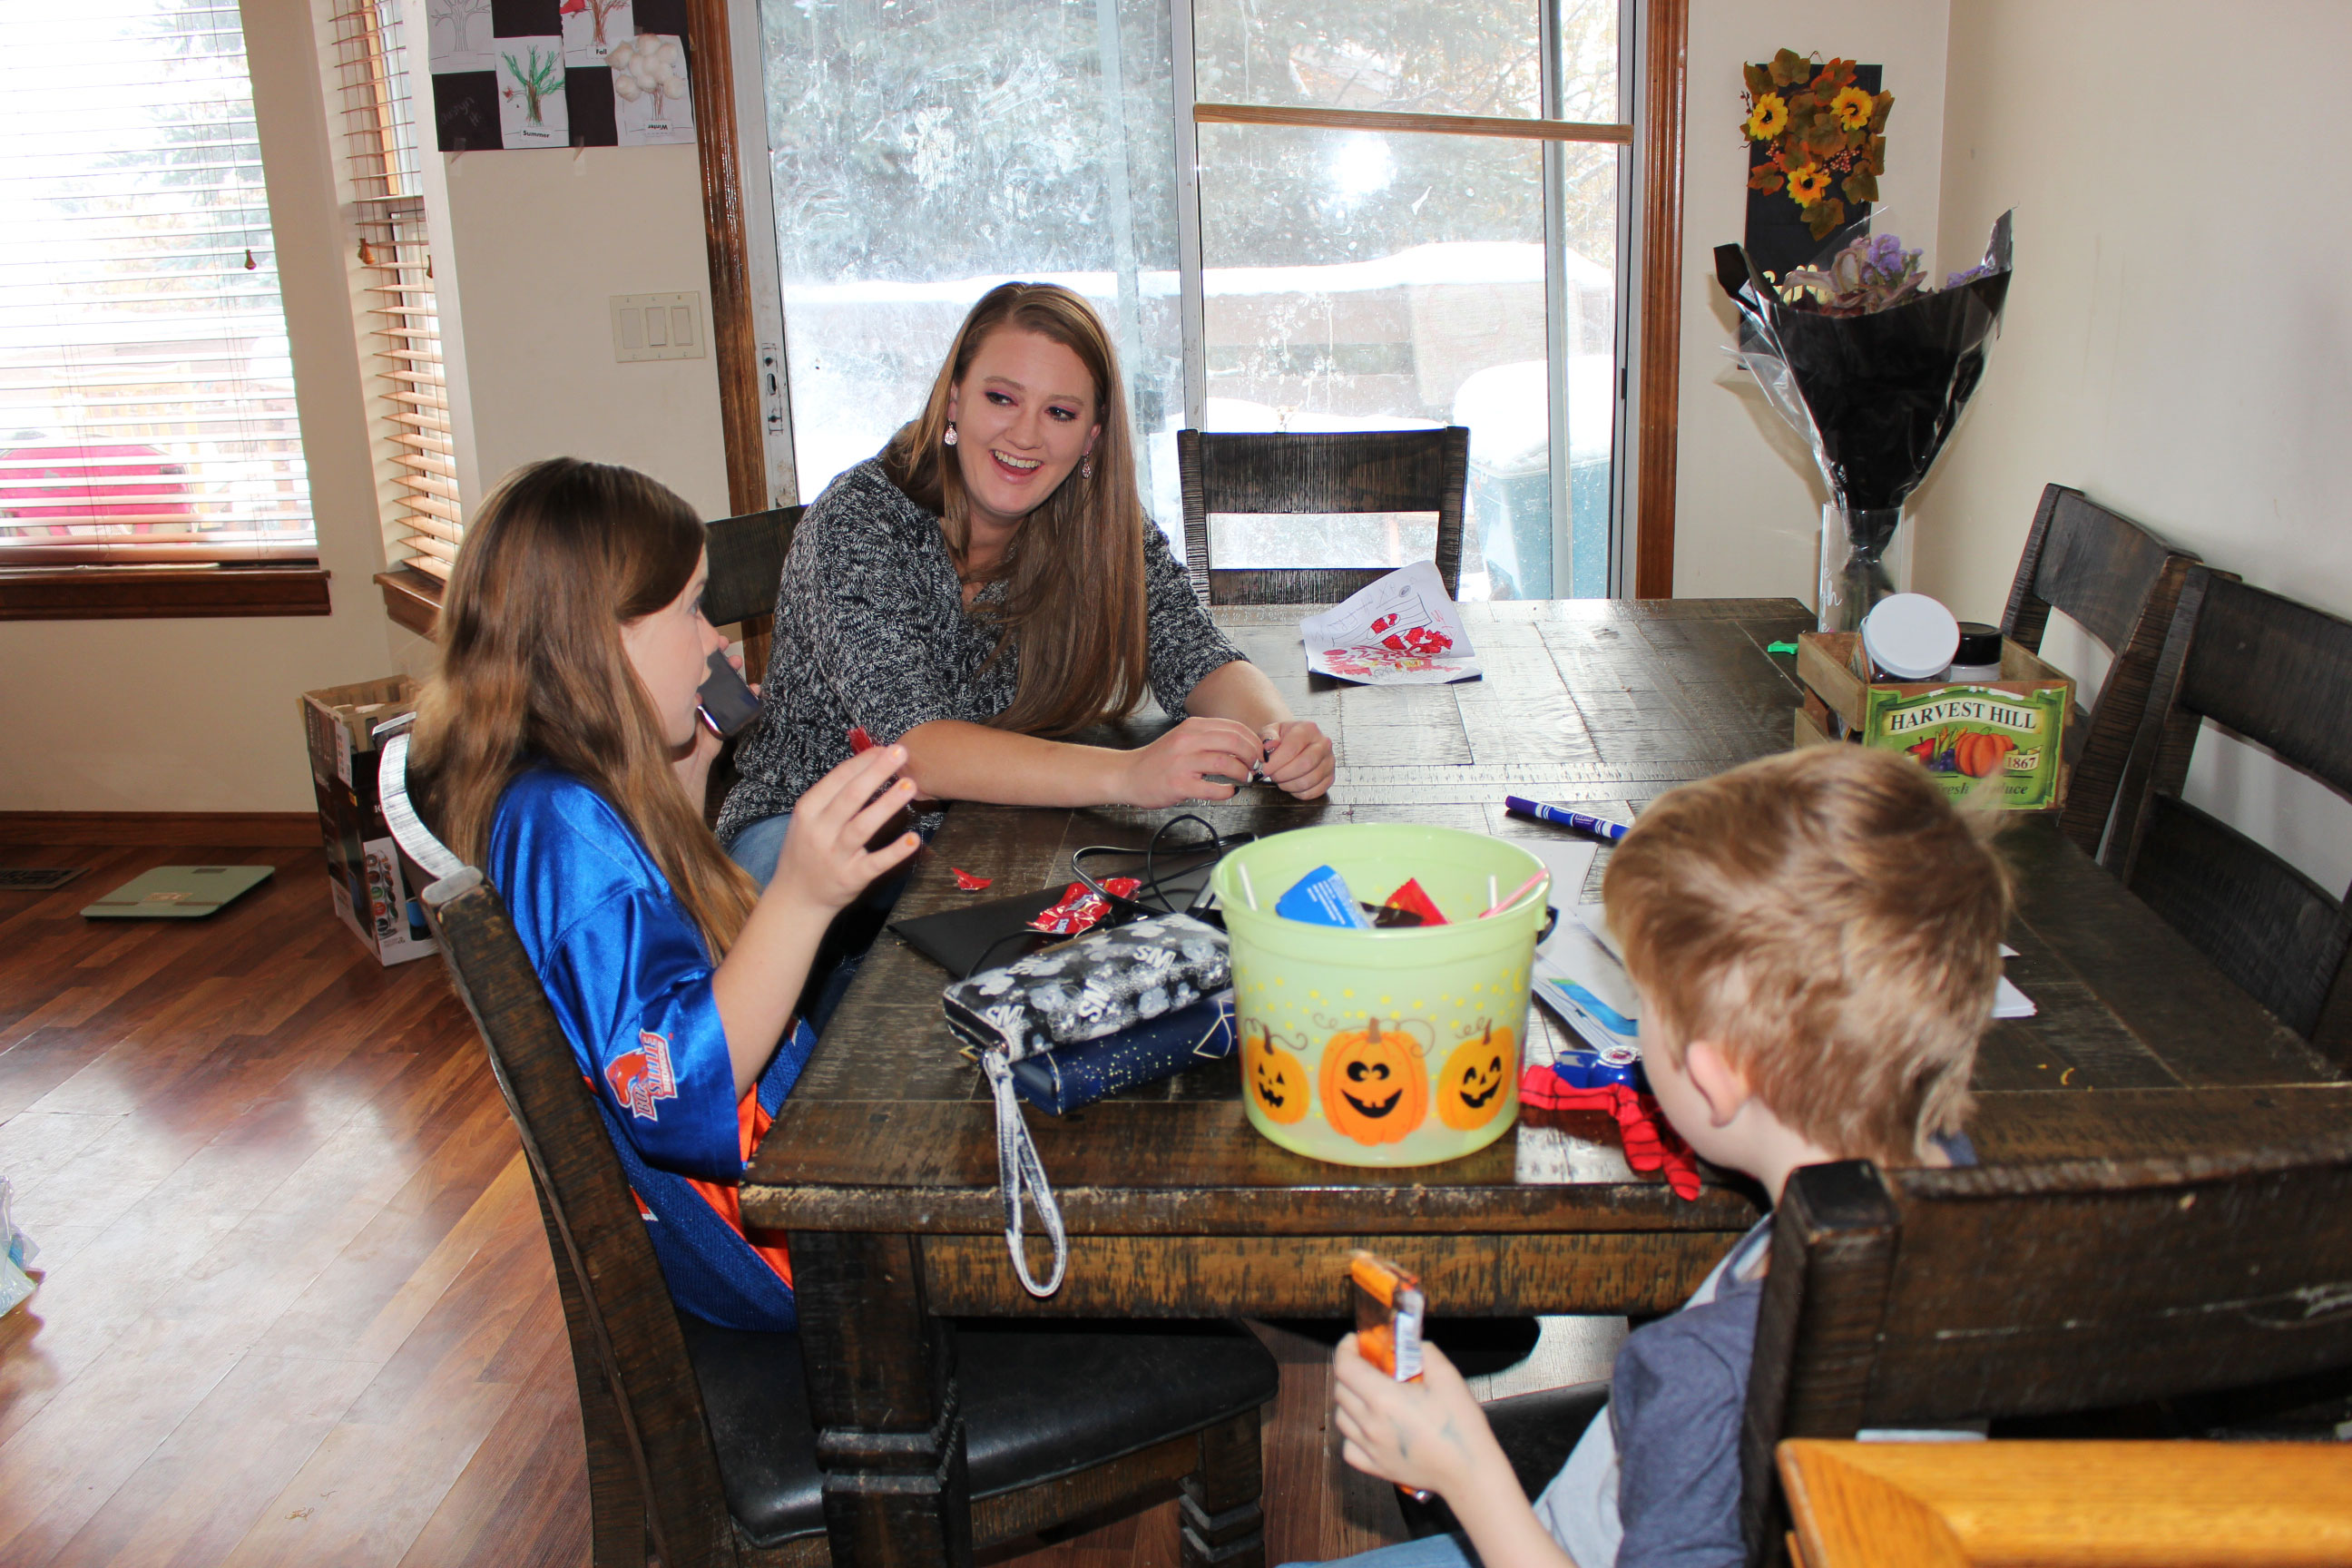 A photo shows Kayla Hopkins at home with her kids. They are sitting at a table.